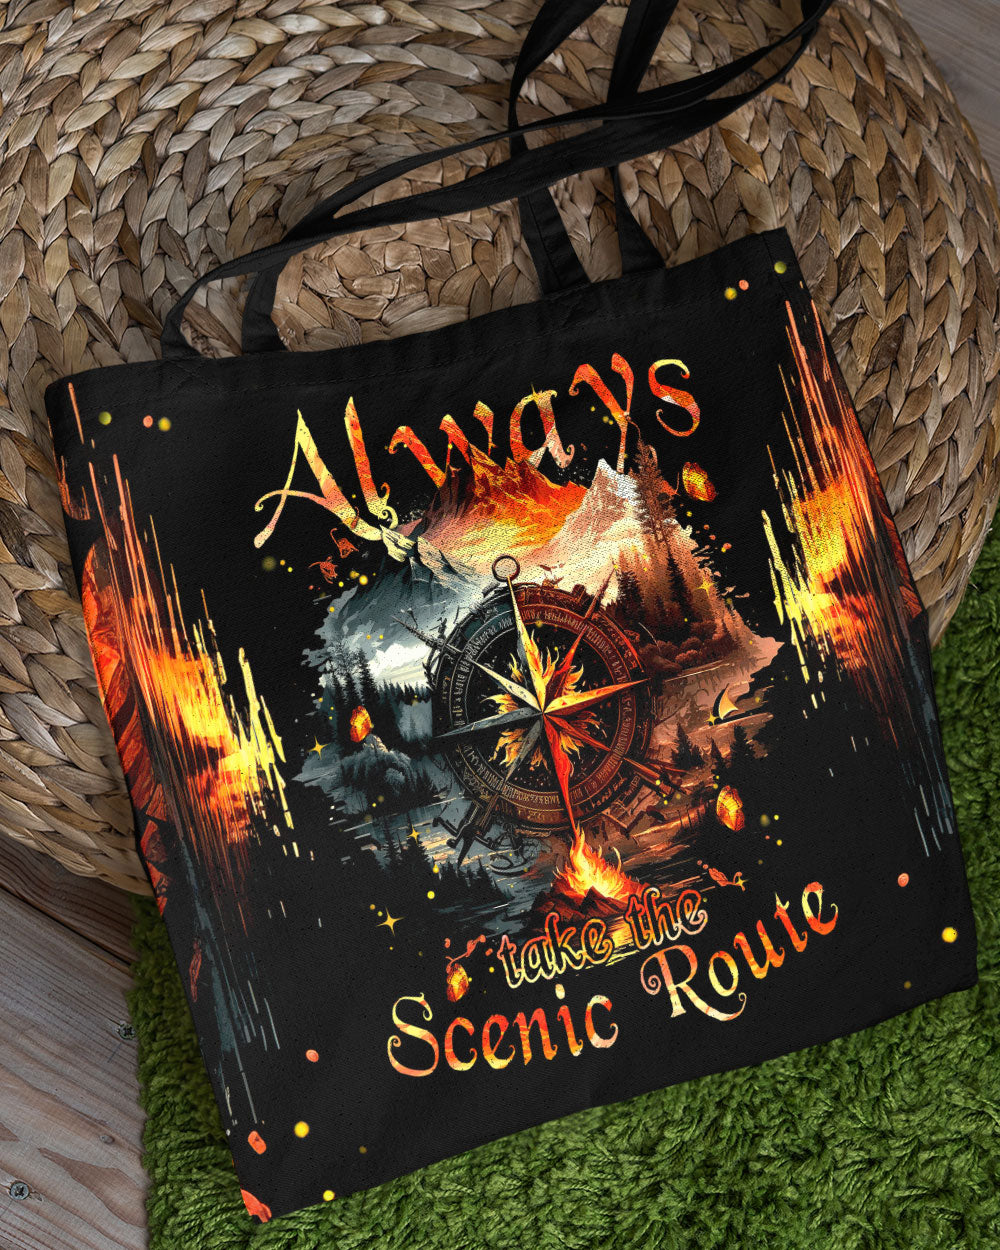 ALWAYS TAKE THE SCENIC ROUTE TOTE BAG - TYTM0206234